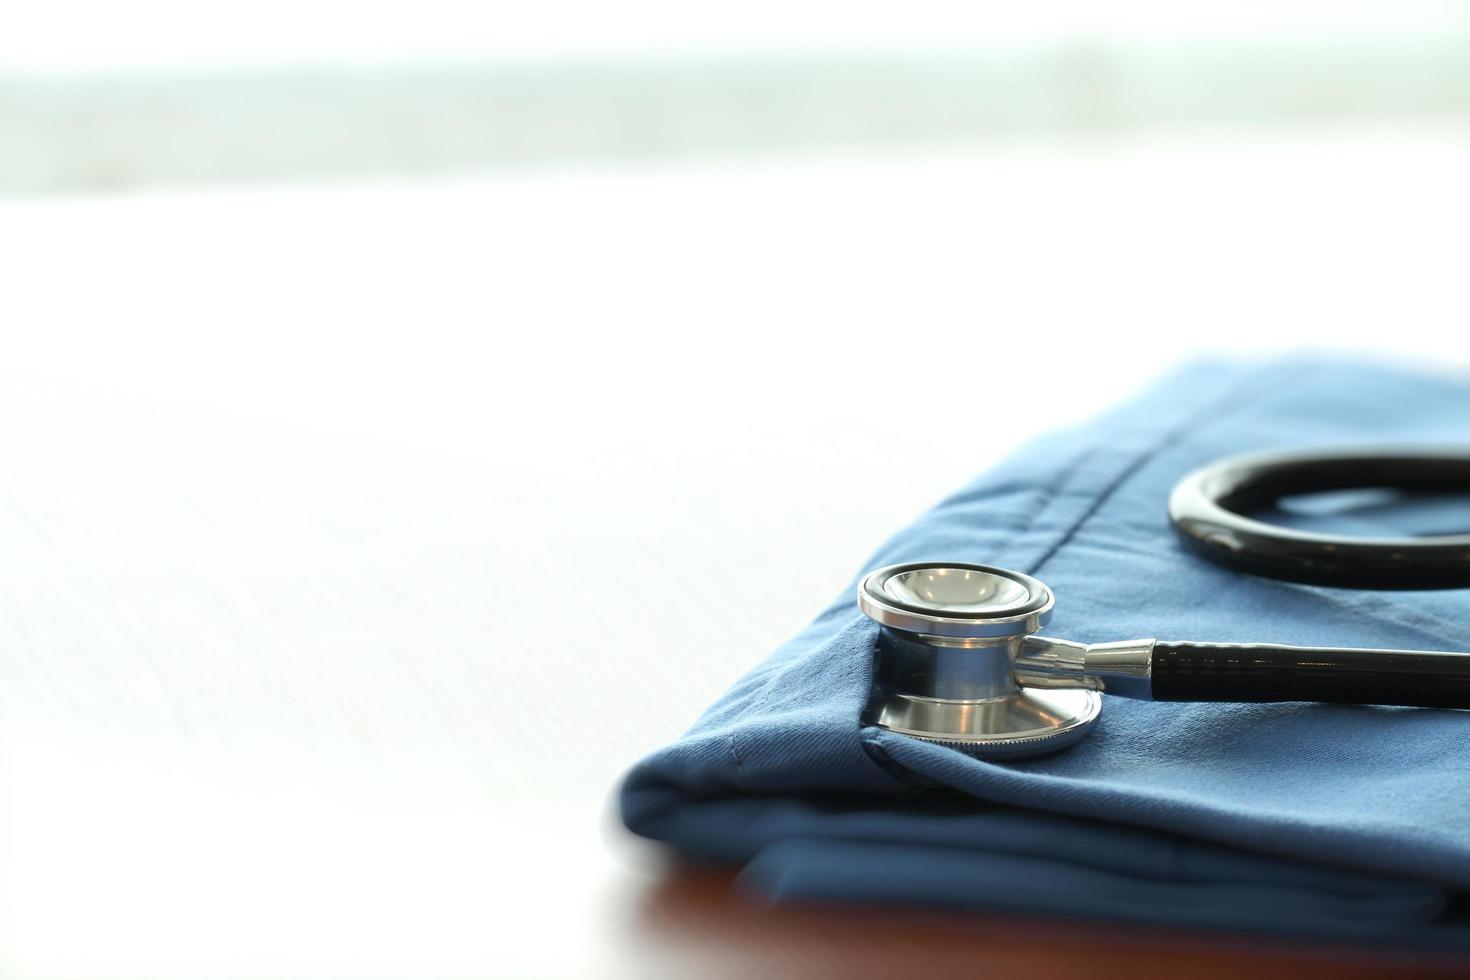 Stethoscope with blue doctor coat on wooden table with shallow DOF evenly matched and background photo